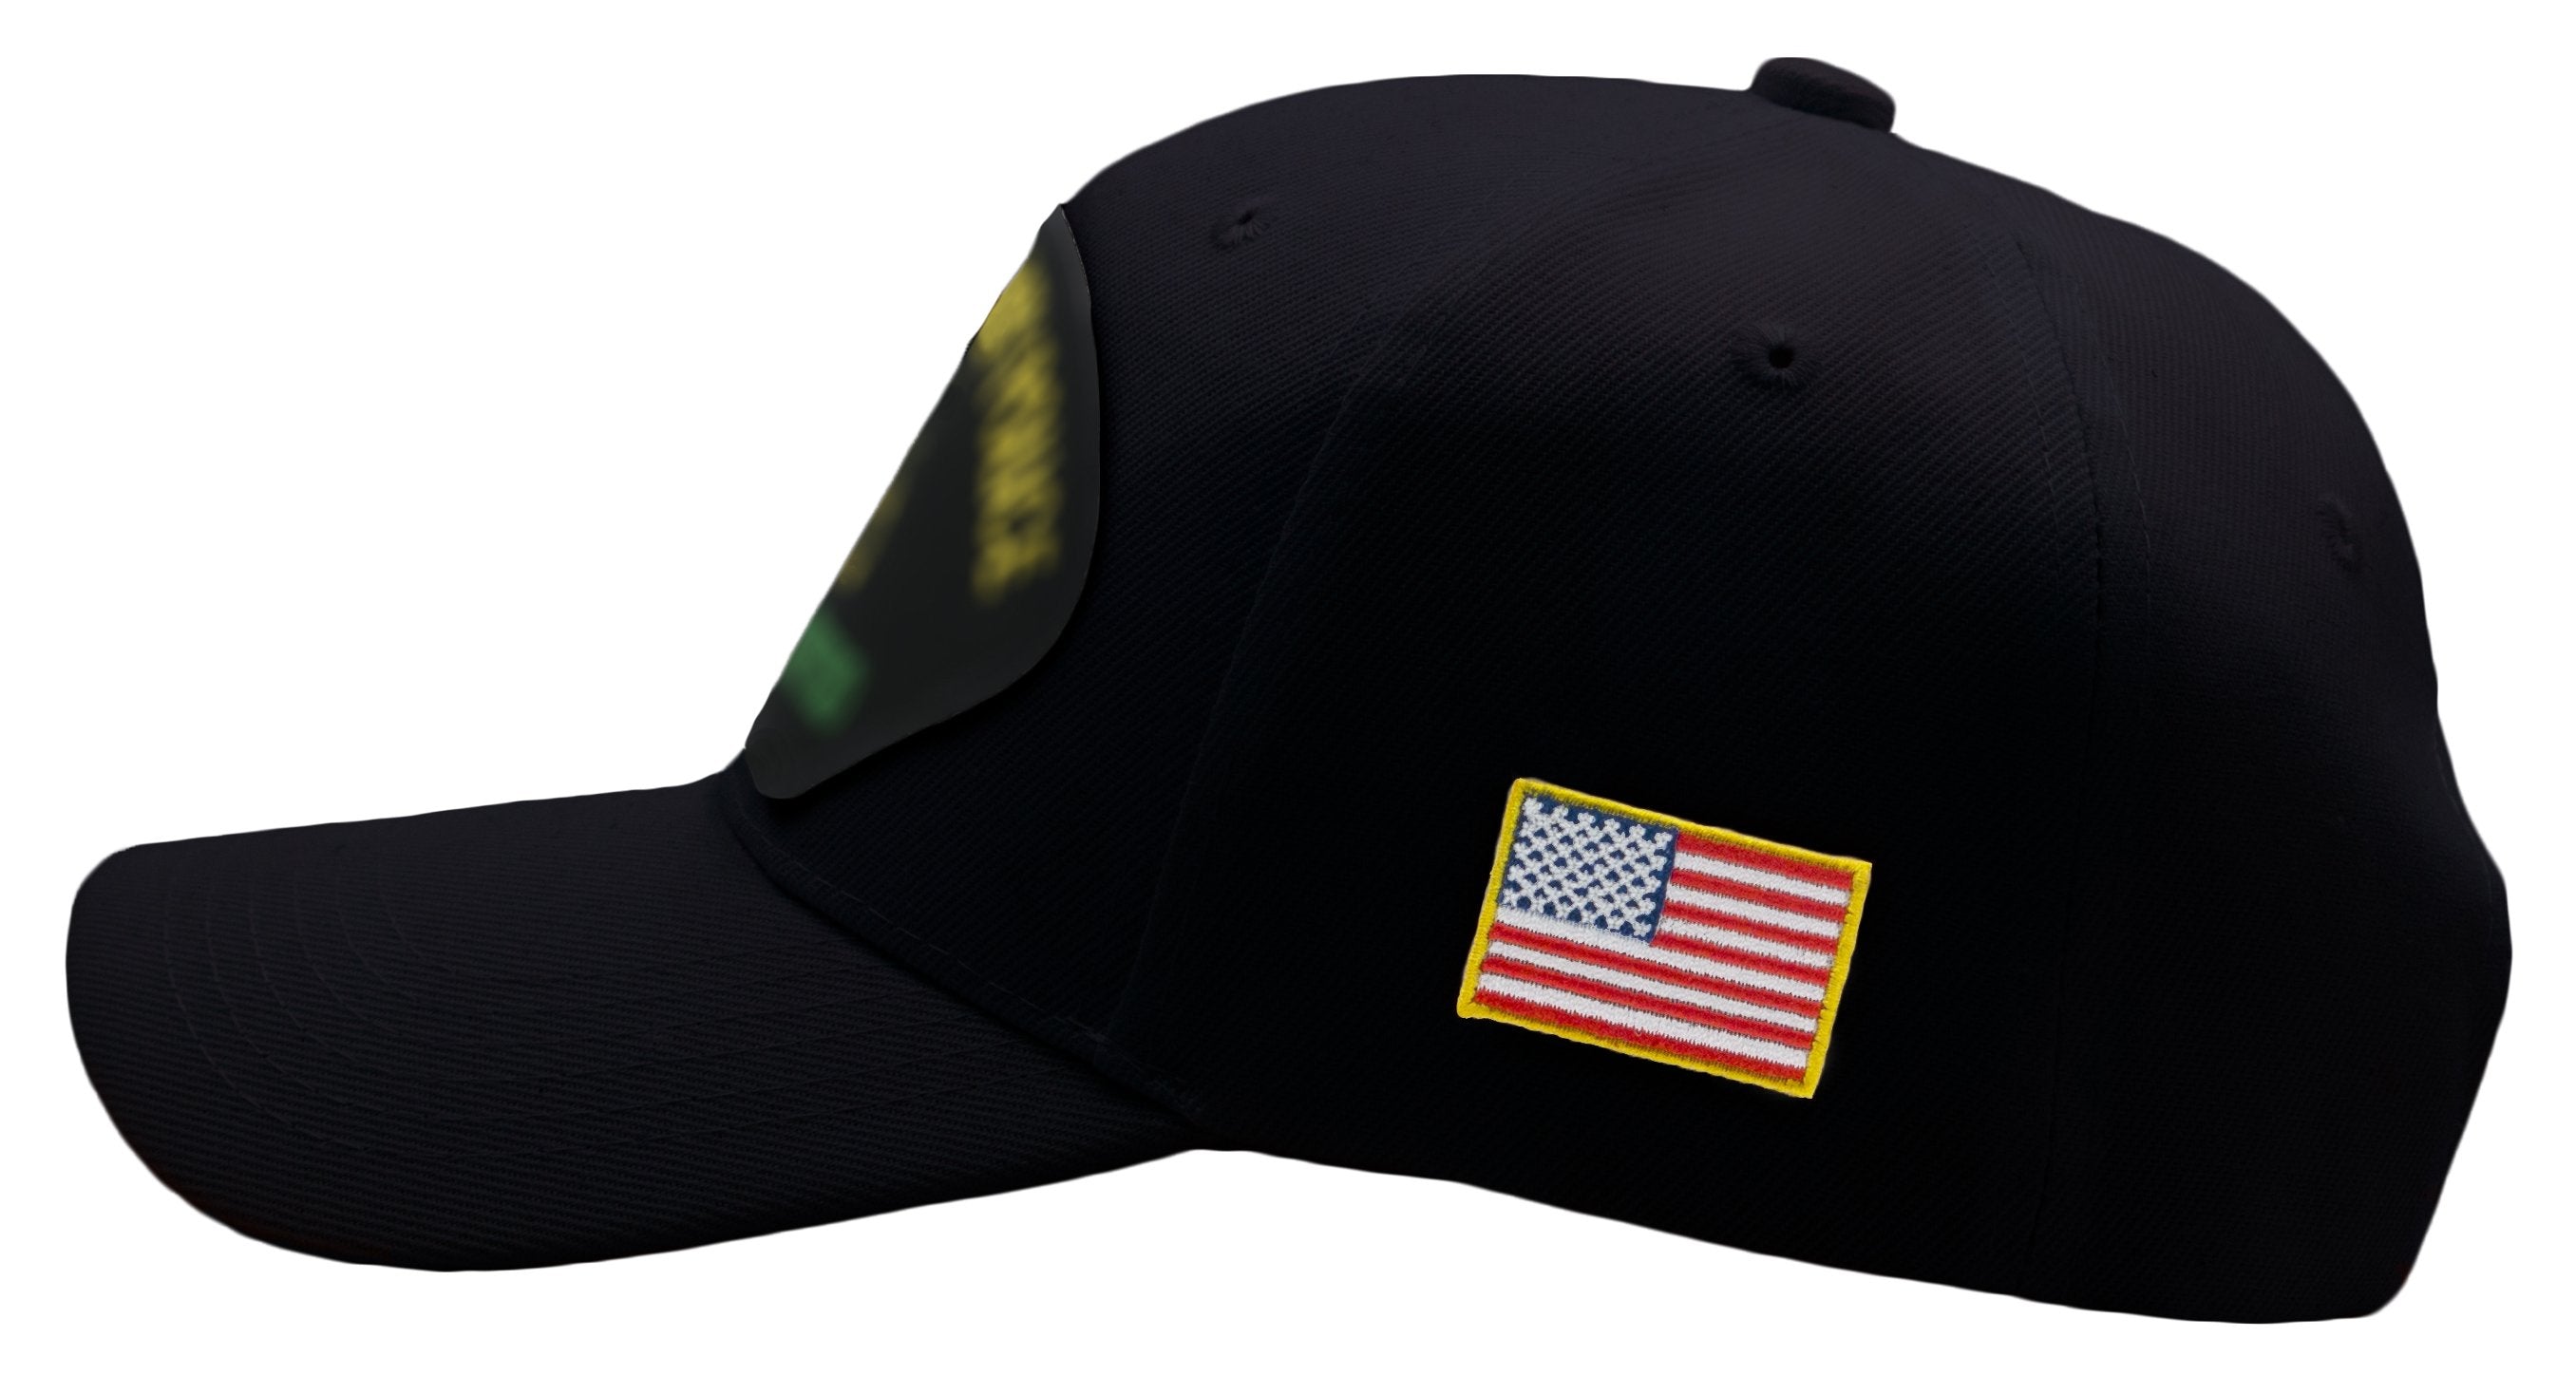 US Marine Corps Dad  Hat - Multiple Colors Available